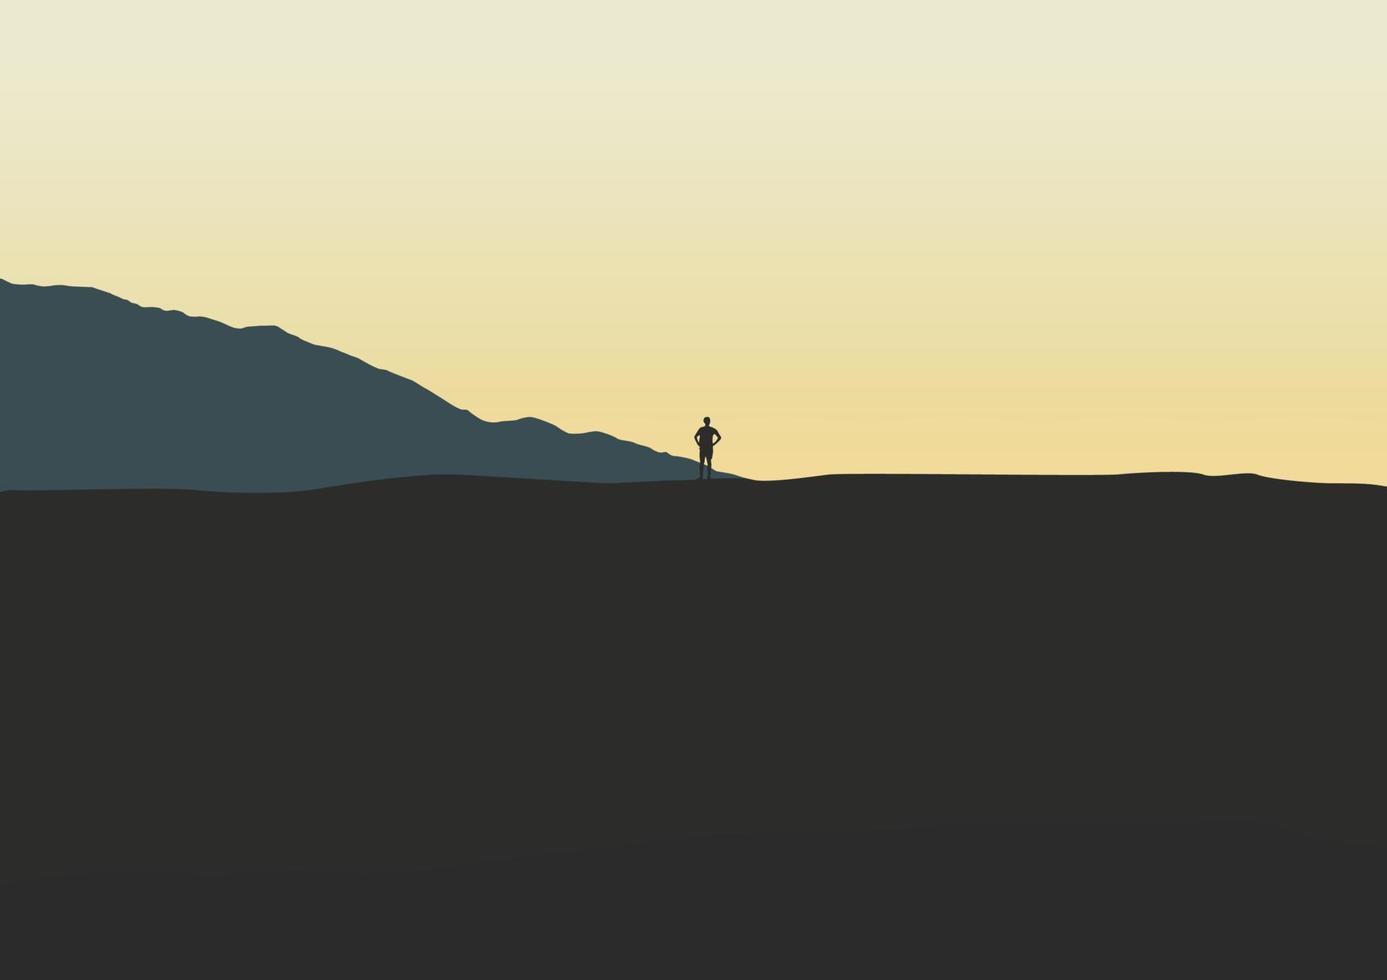 silhouette of a person in the mountains in the morning, vector illustration.